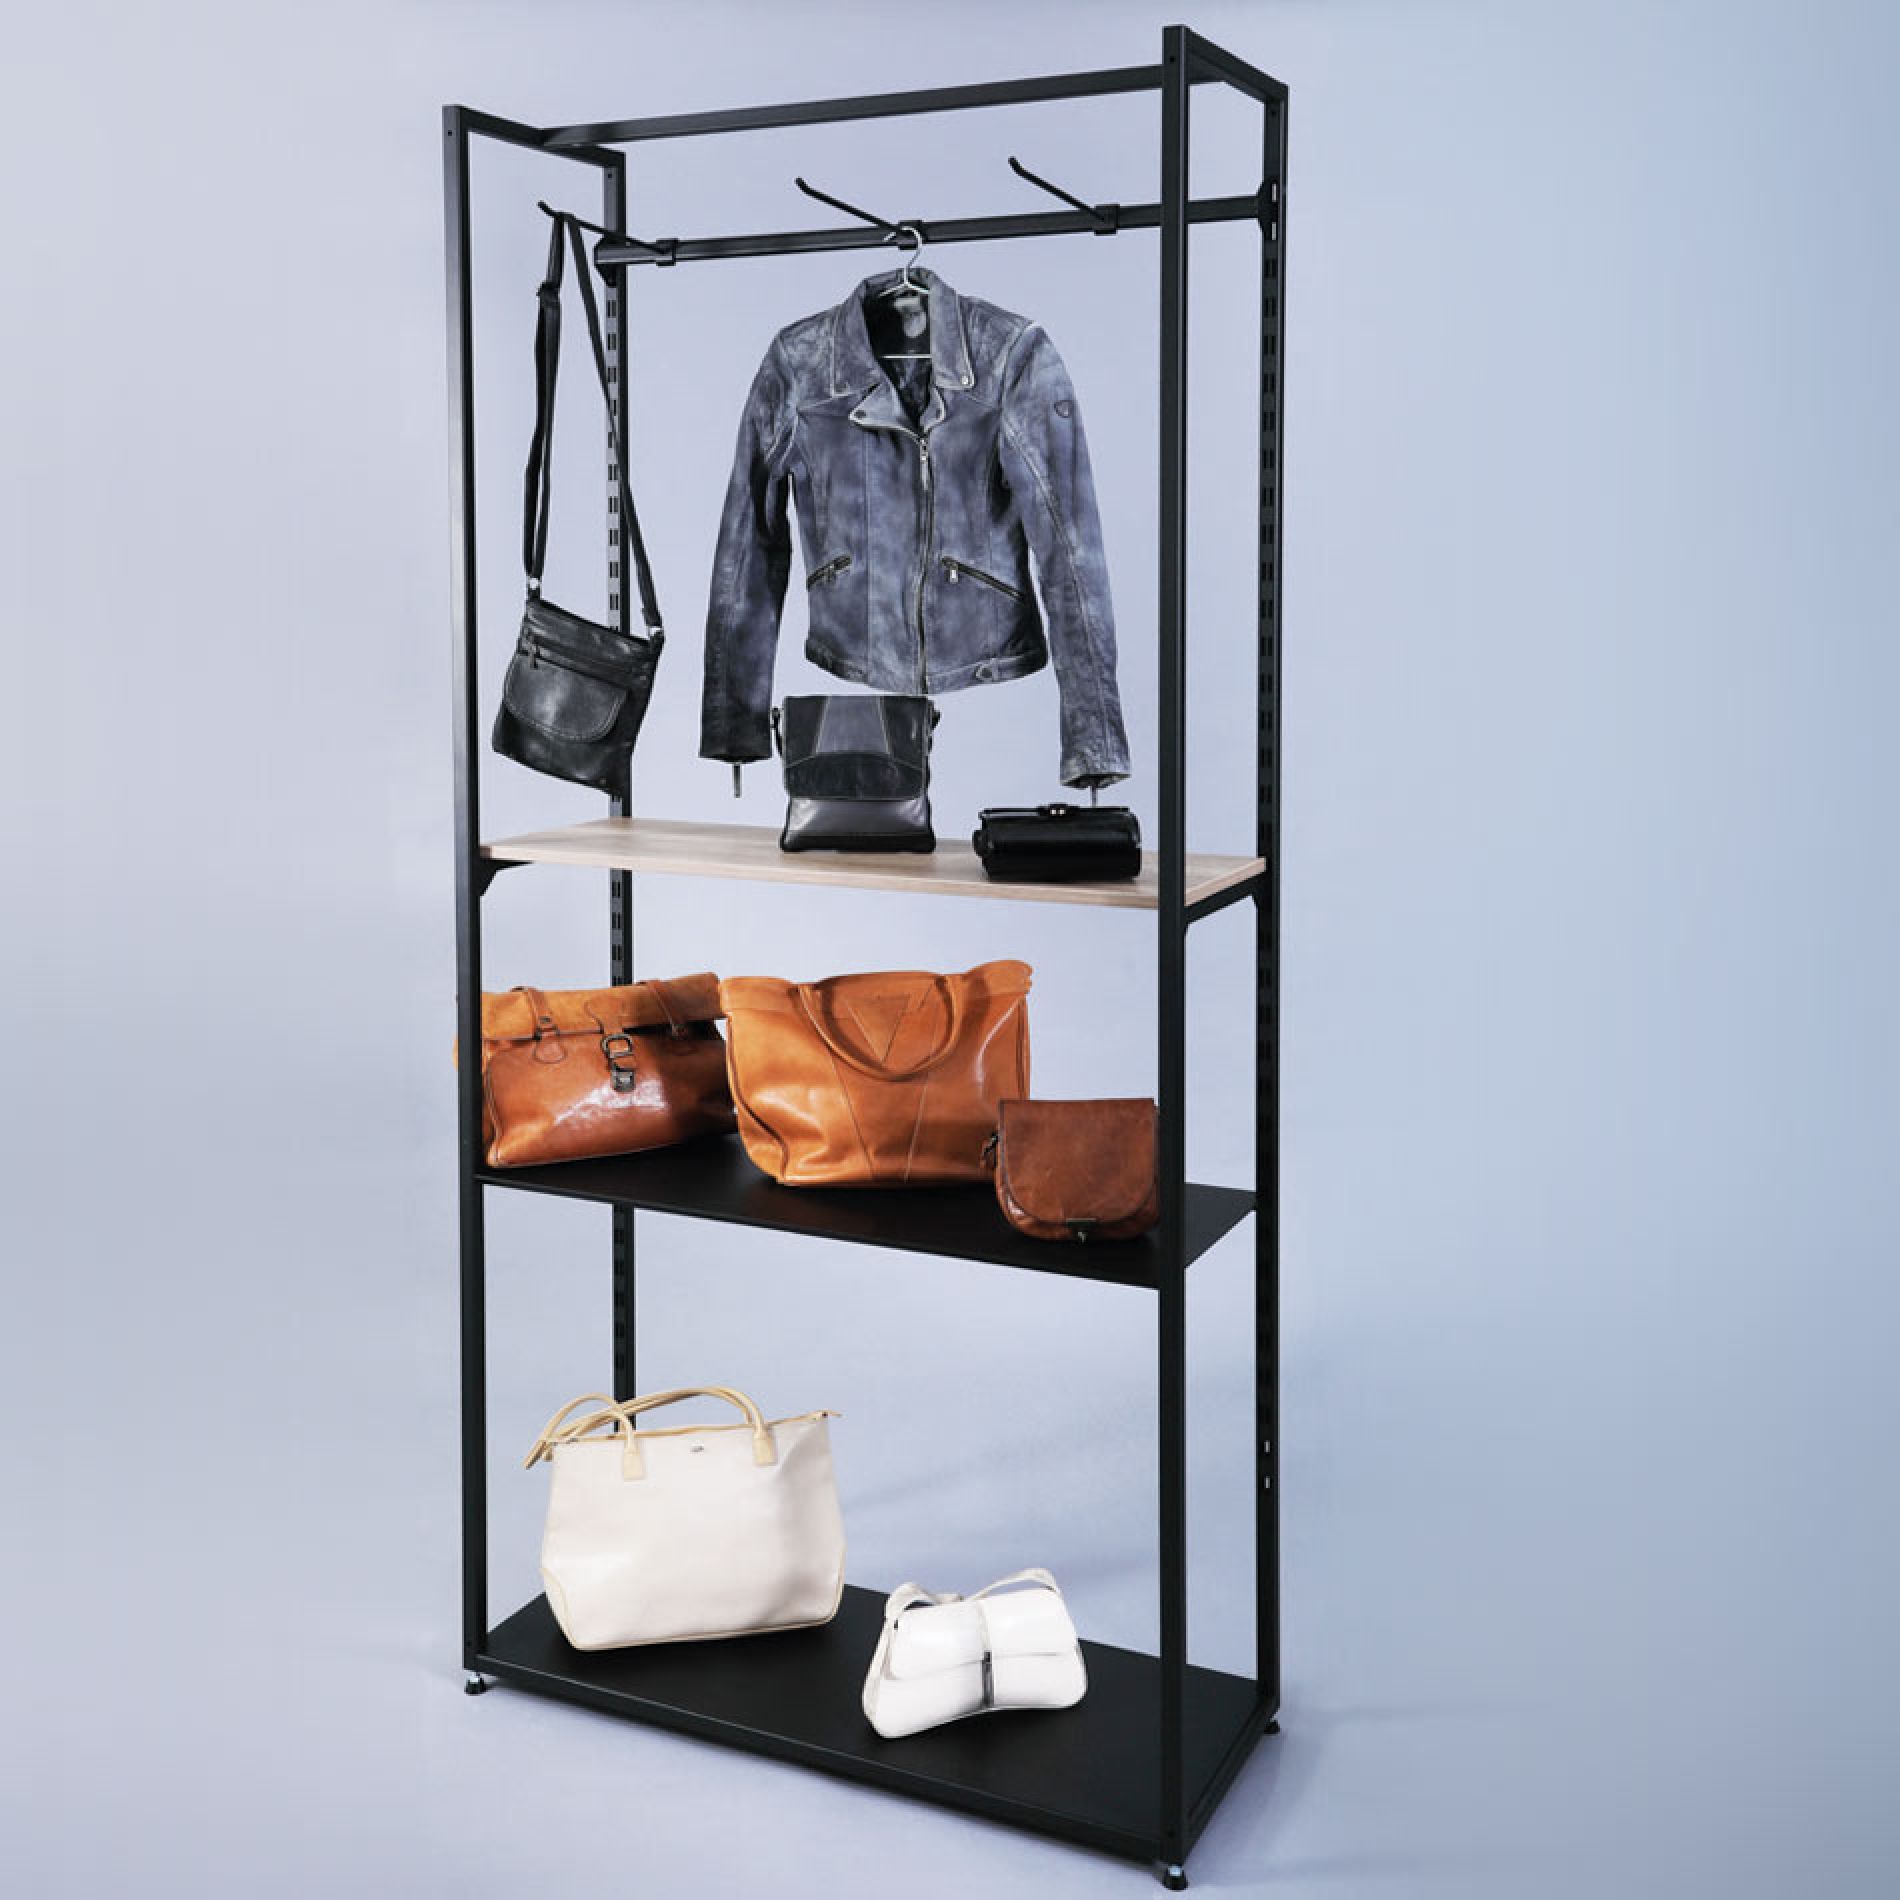 CLOTHES HANGER SYSTEM CHROME Gallery Image